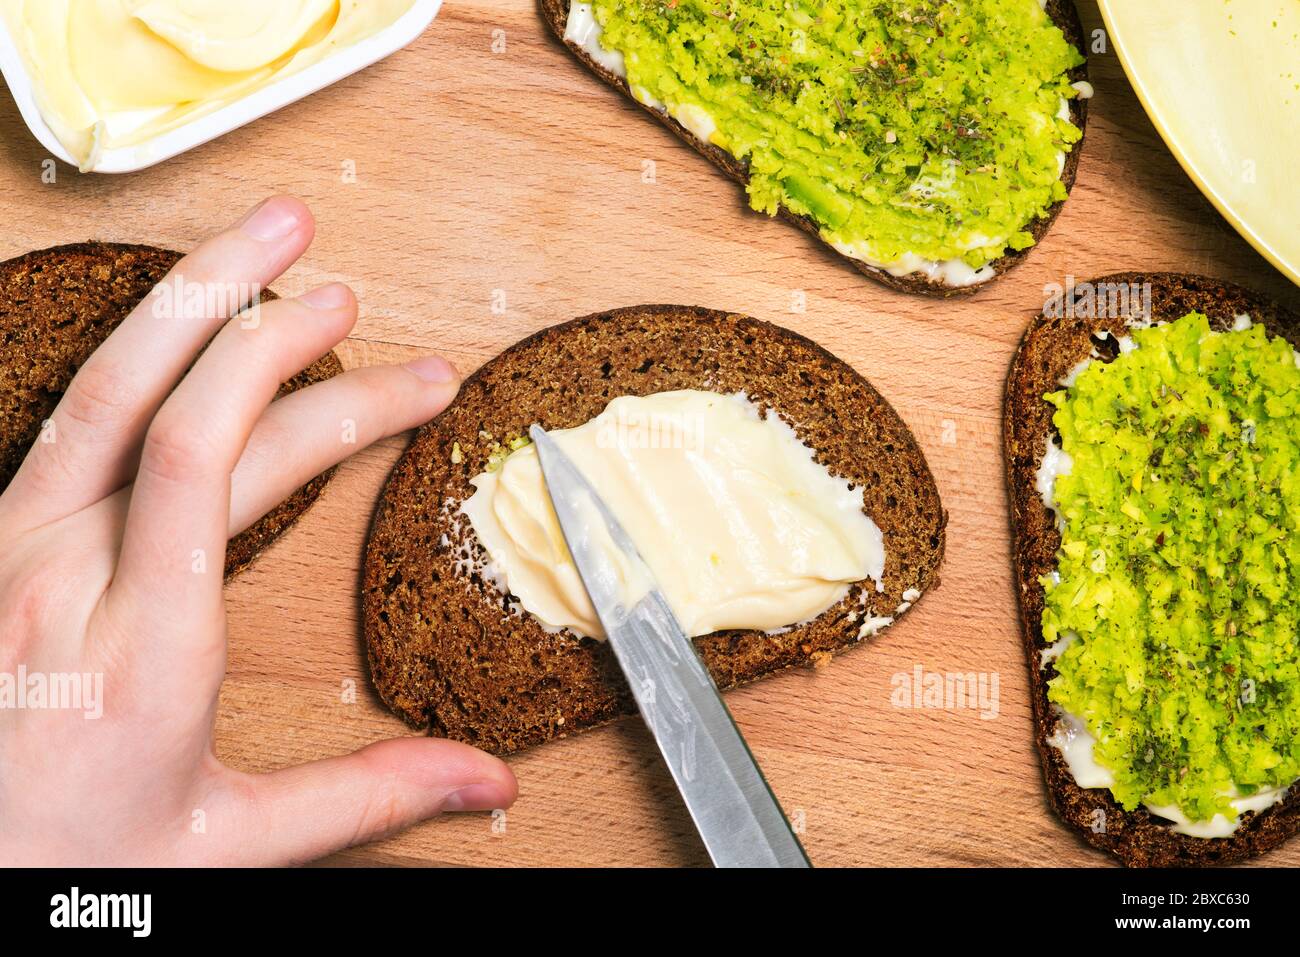 A girl prepares an avocado sandwich. A close-up hand holds bread and spreads cheese. Ready-made sandwiches on a wooden Board. Stock Photo